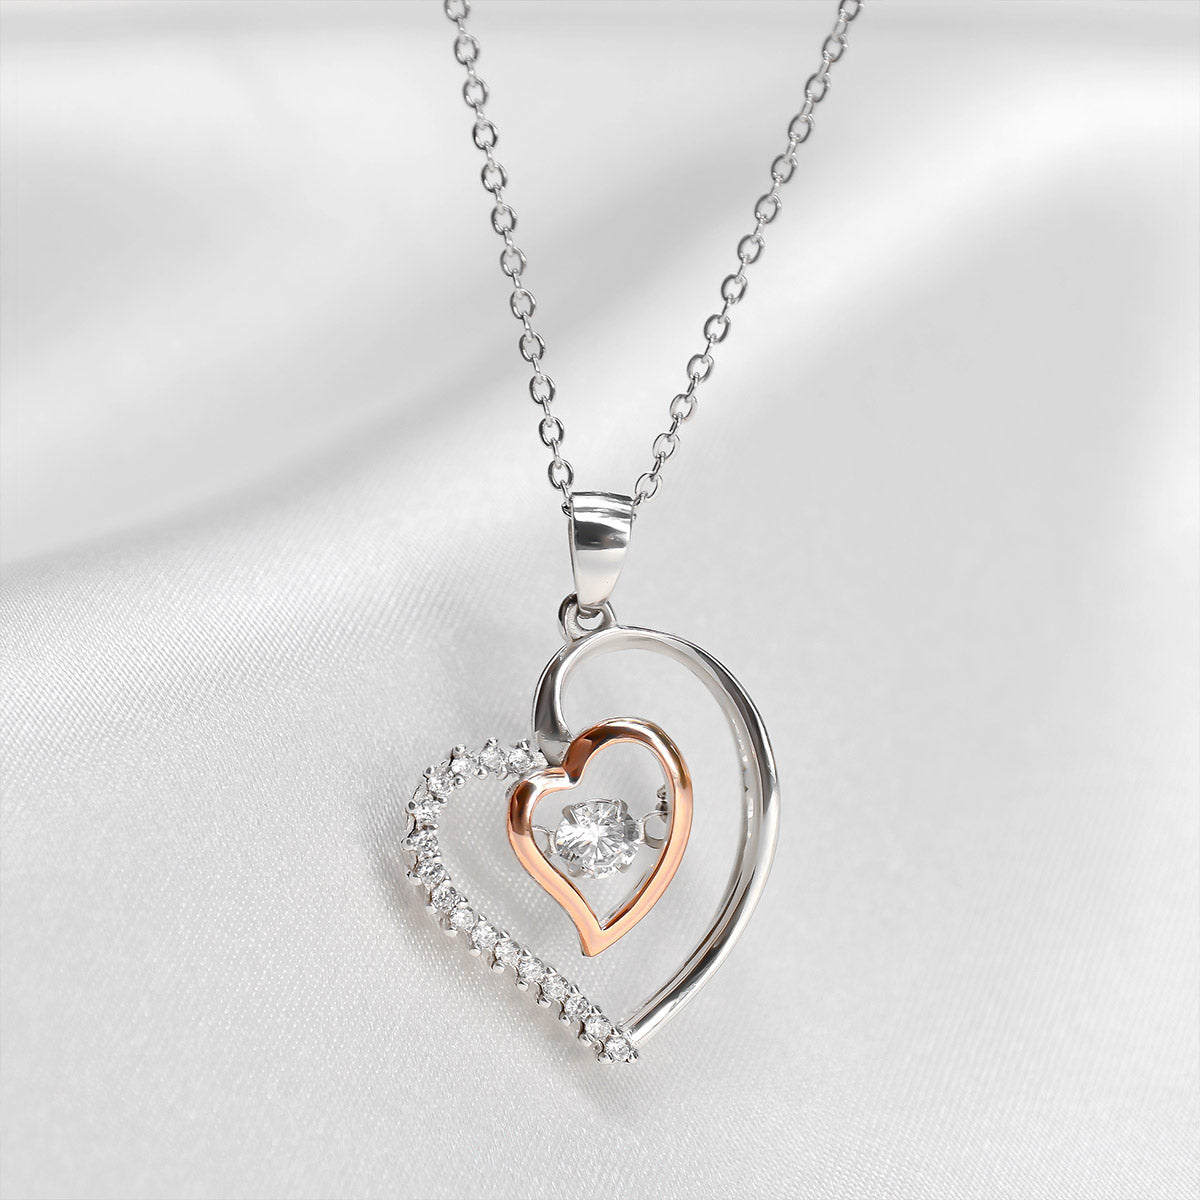 To My Sister, Happy Birthday - Luxe Heart Necklace Gift Set